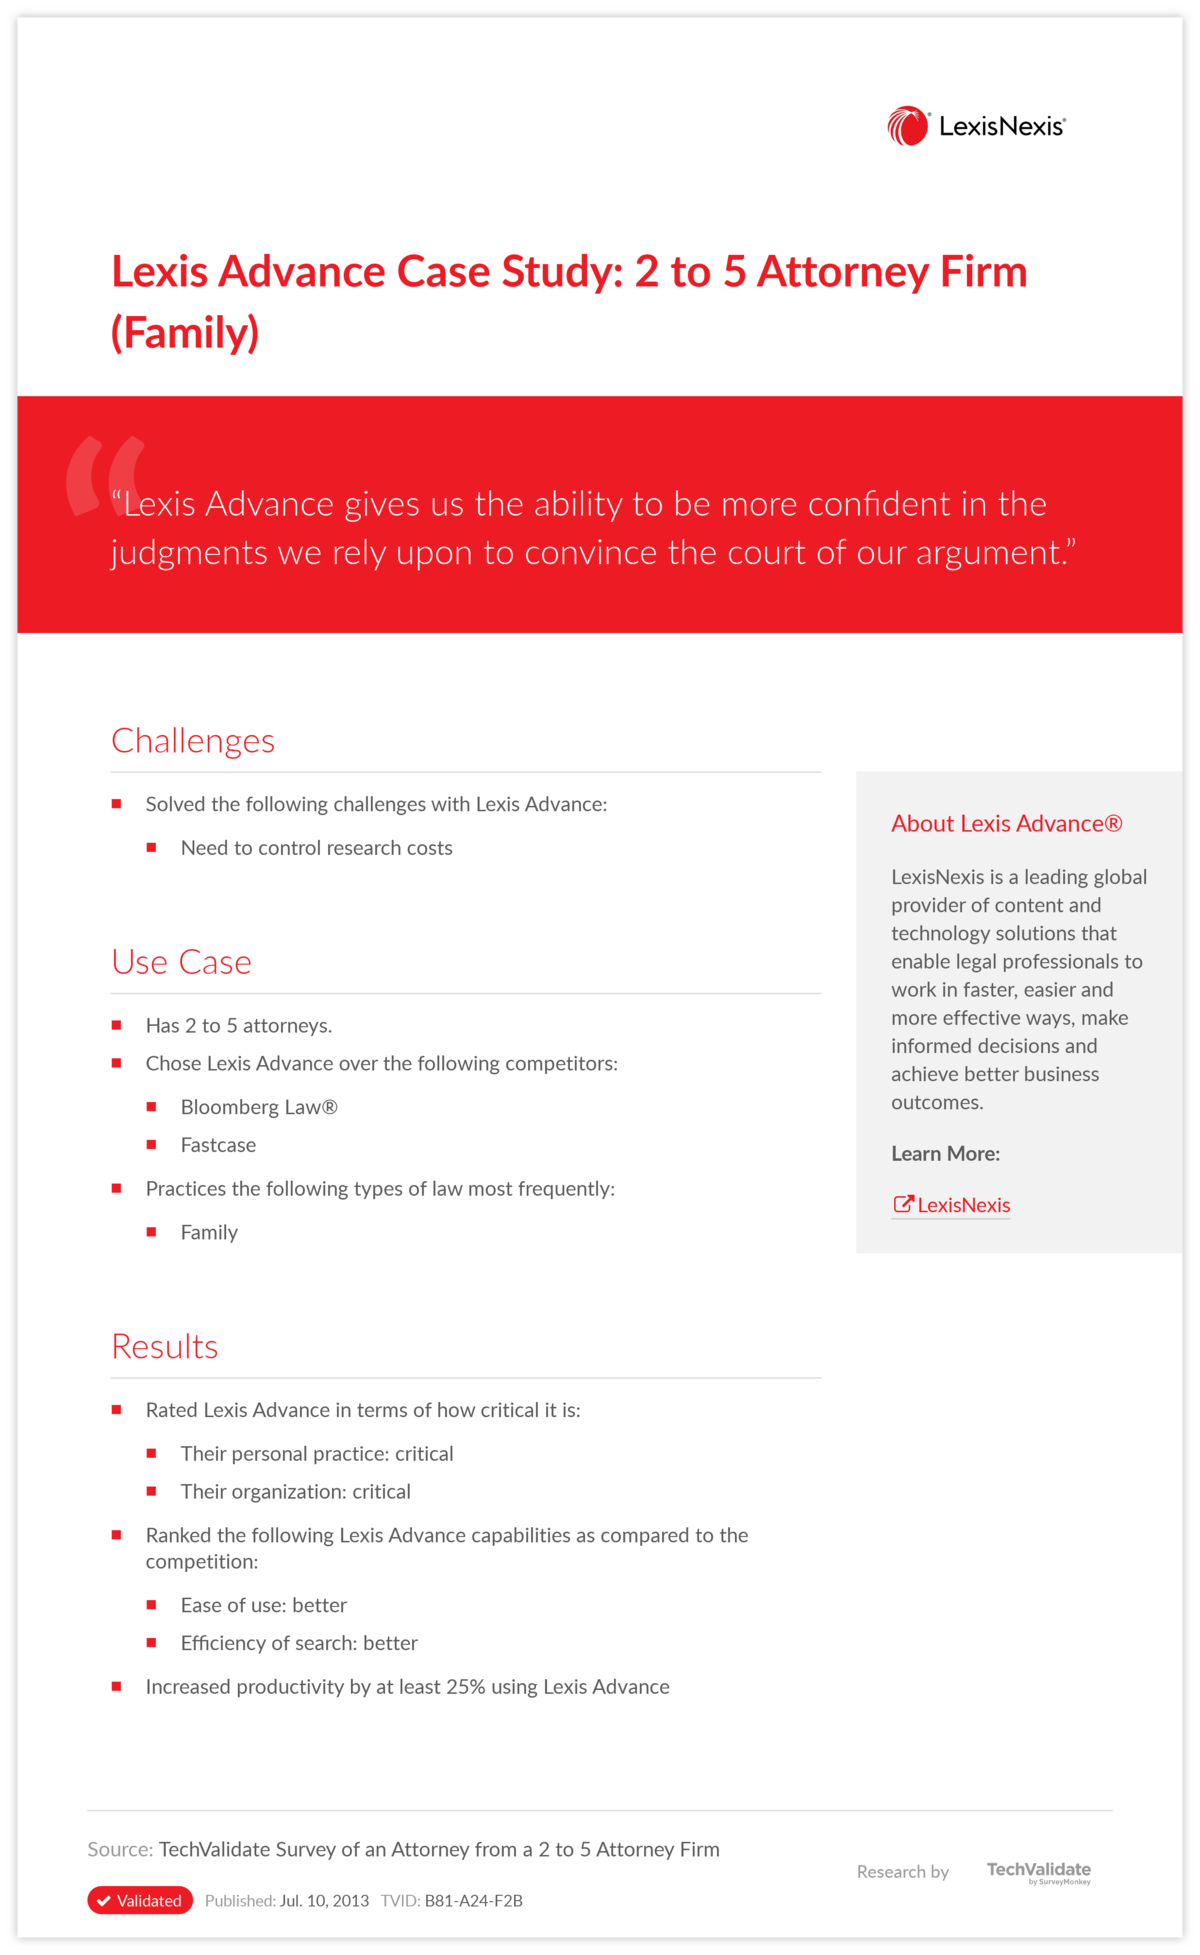 Lexis Advance Case Study: 2 to 5 Attorney Firm (Family)